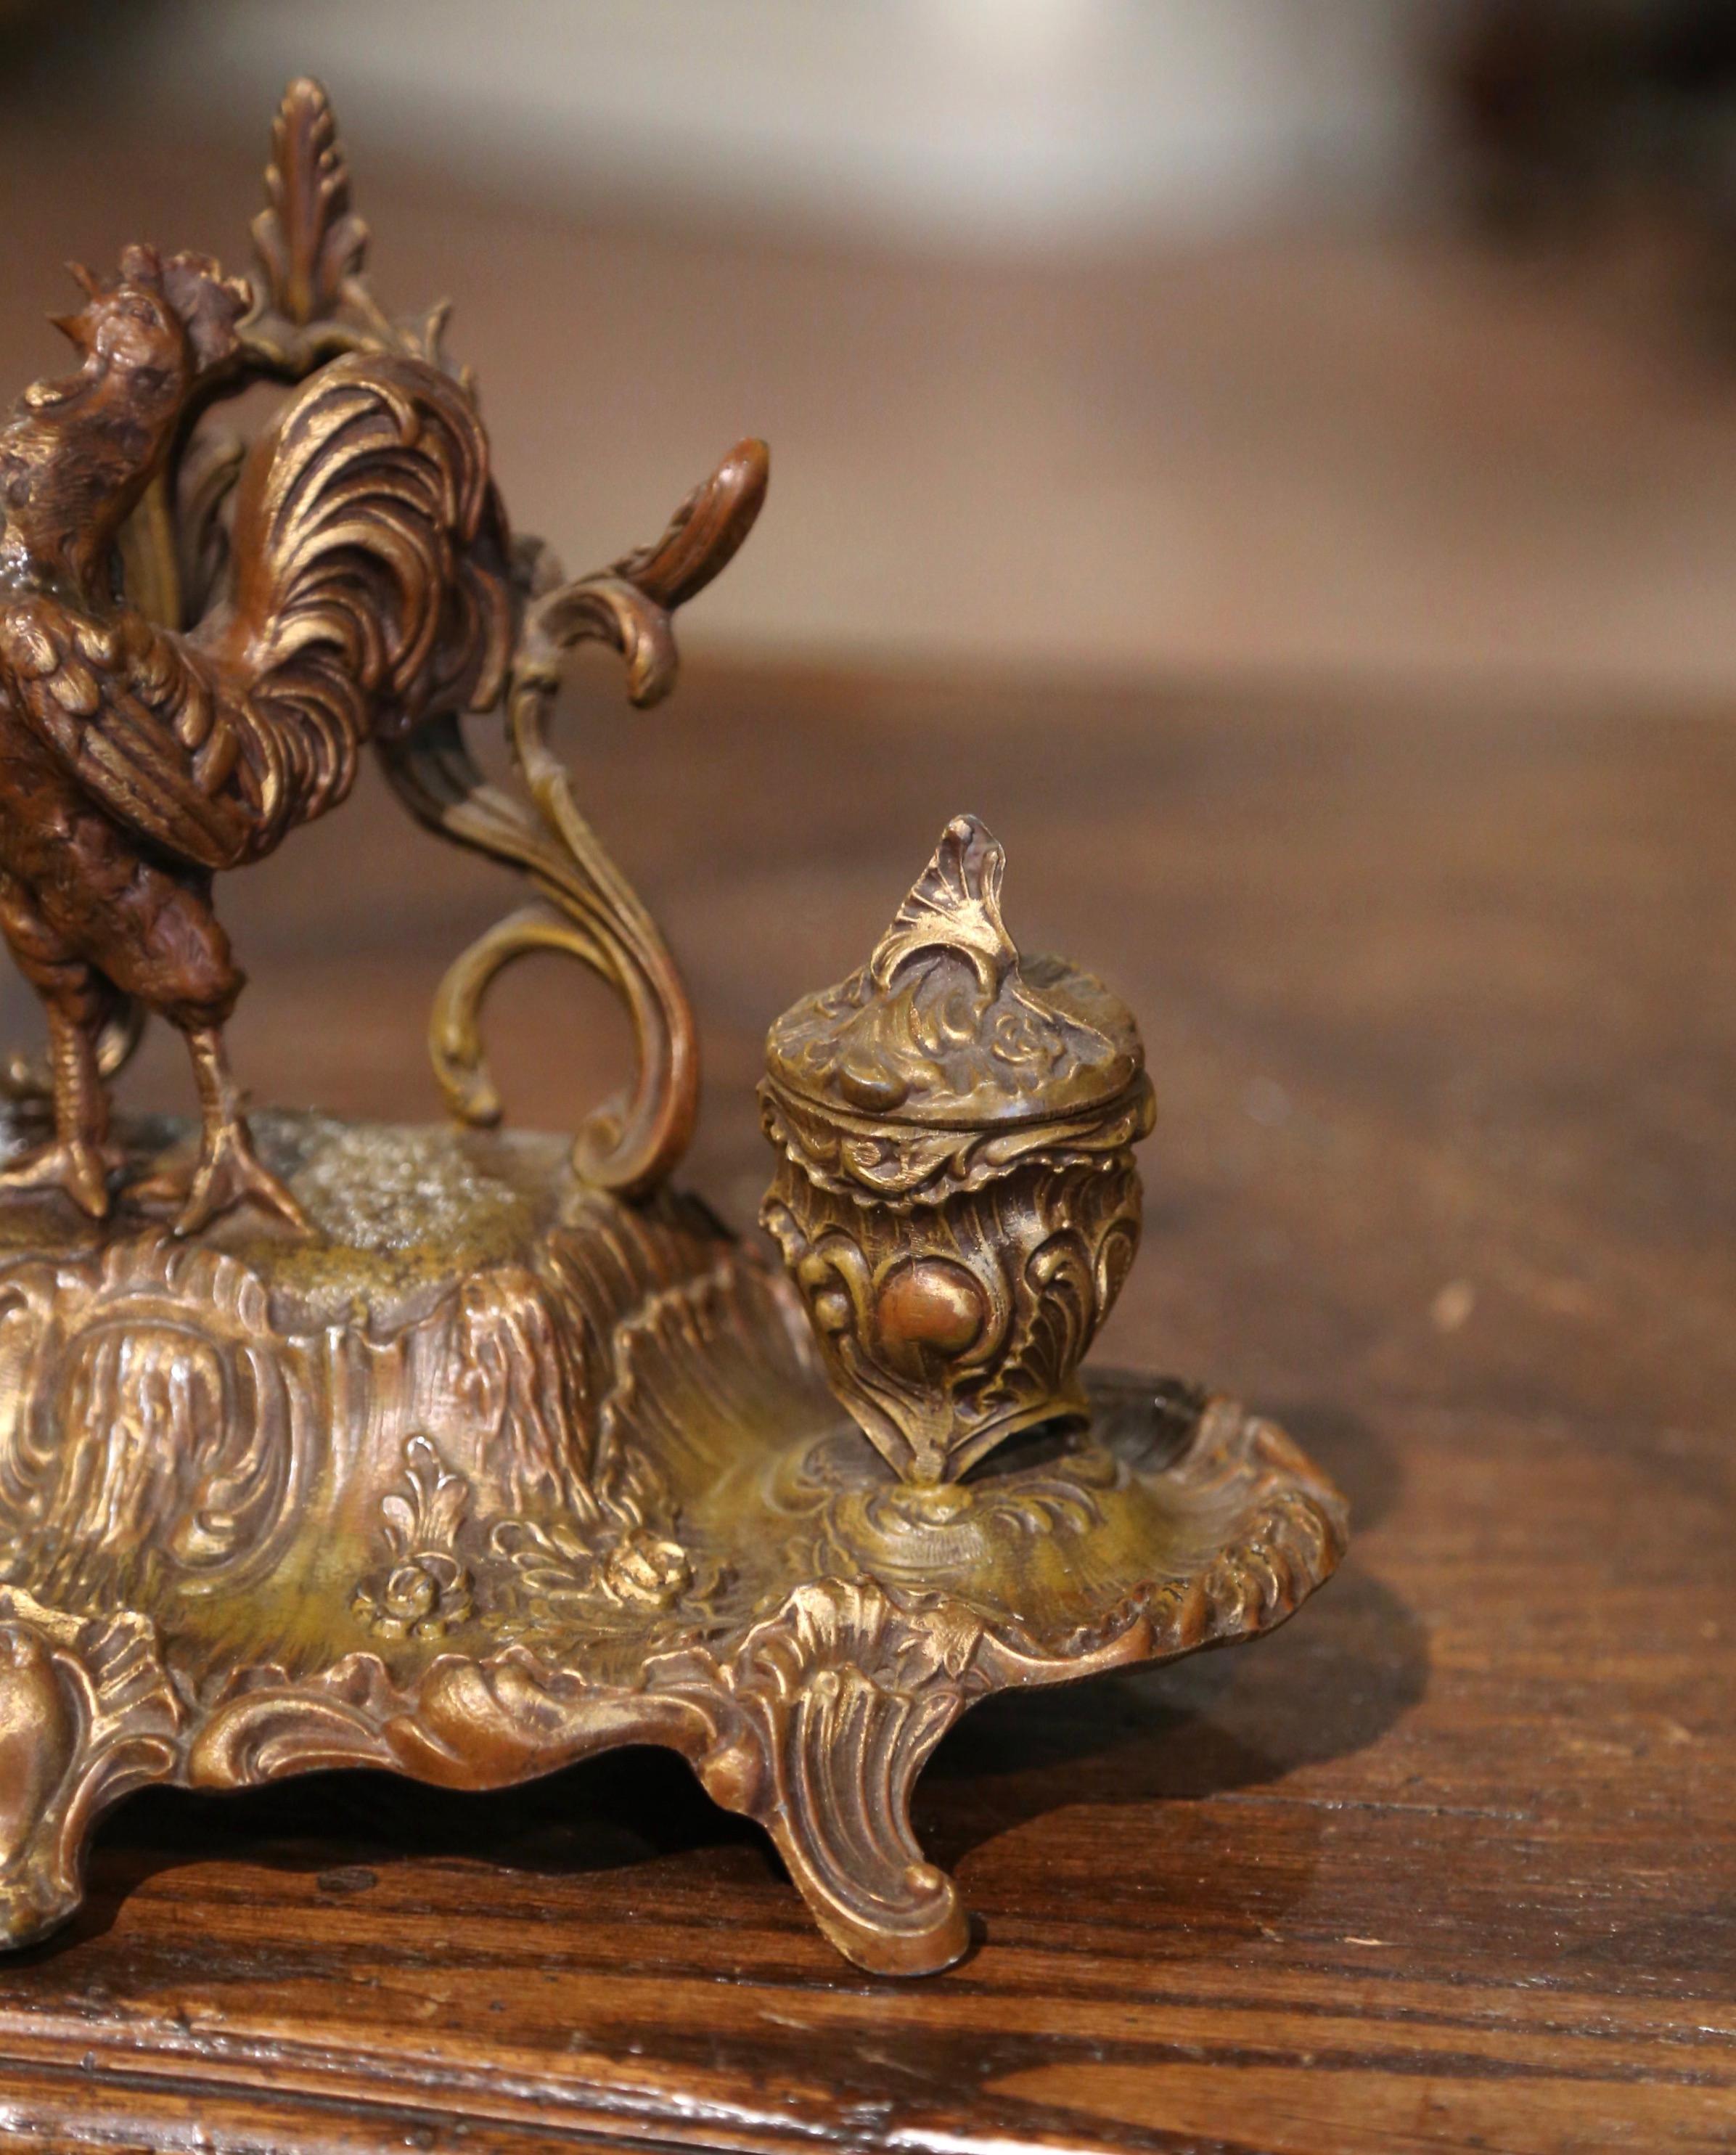 19th Century French Gilt Spelter Inkwell with Rooster Sculpture Signed A. Bossu In Excellent Condition For Sale In Dallas, TX